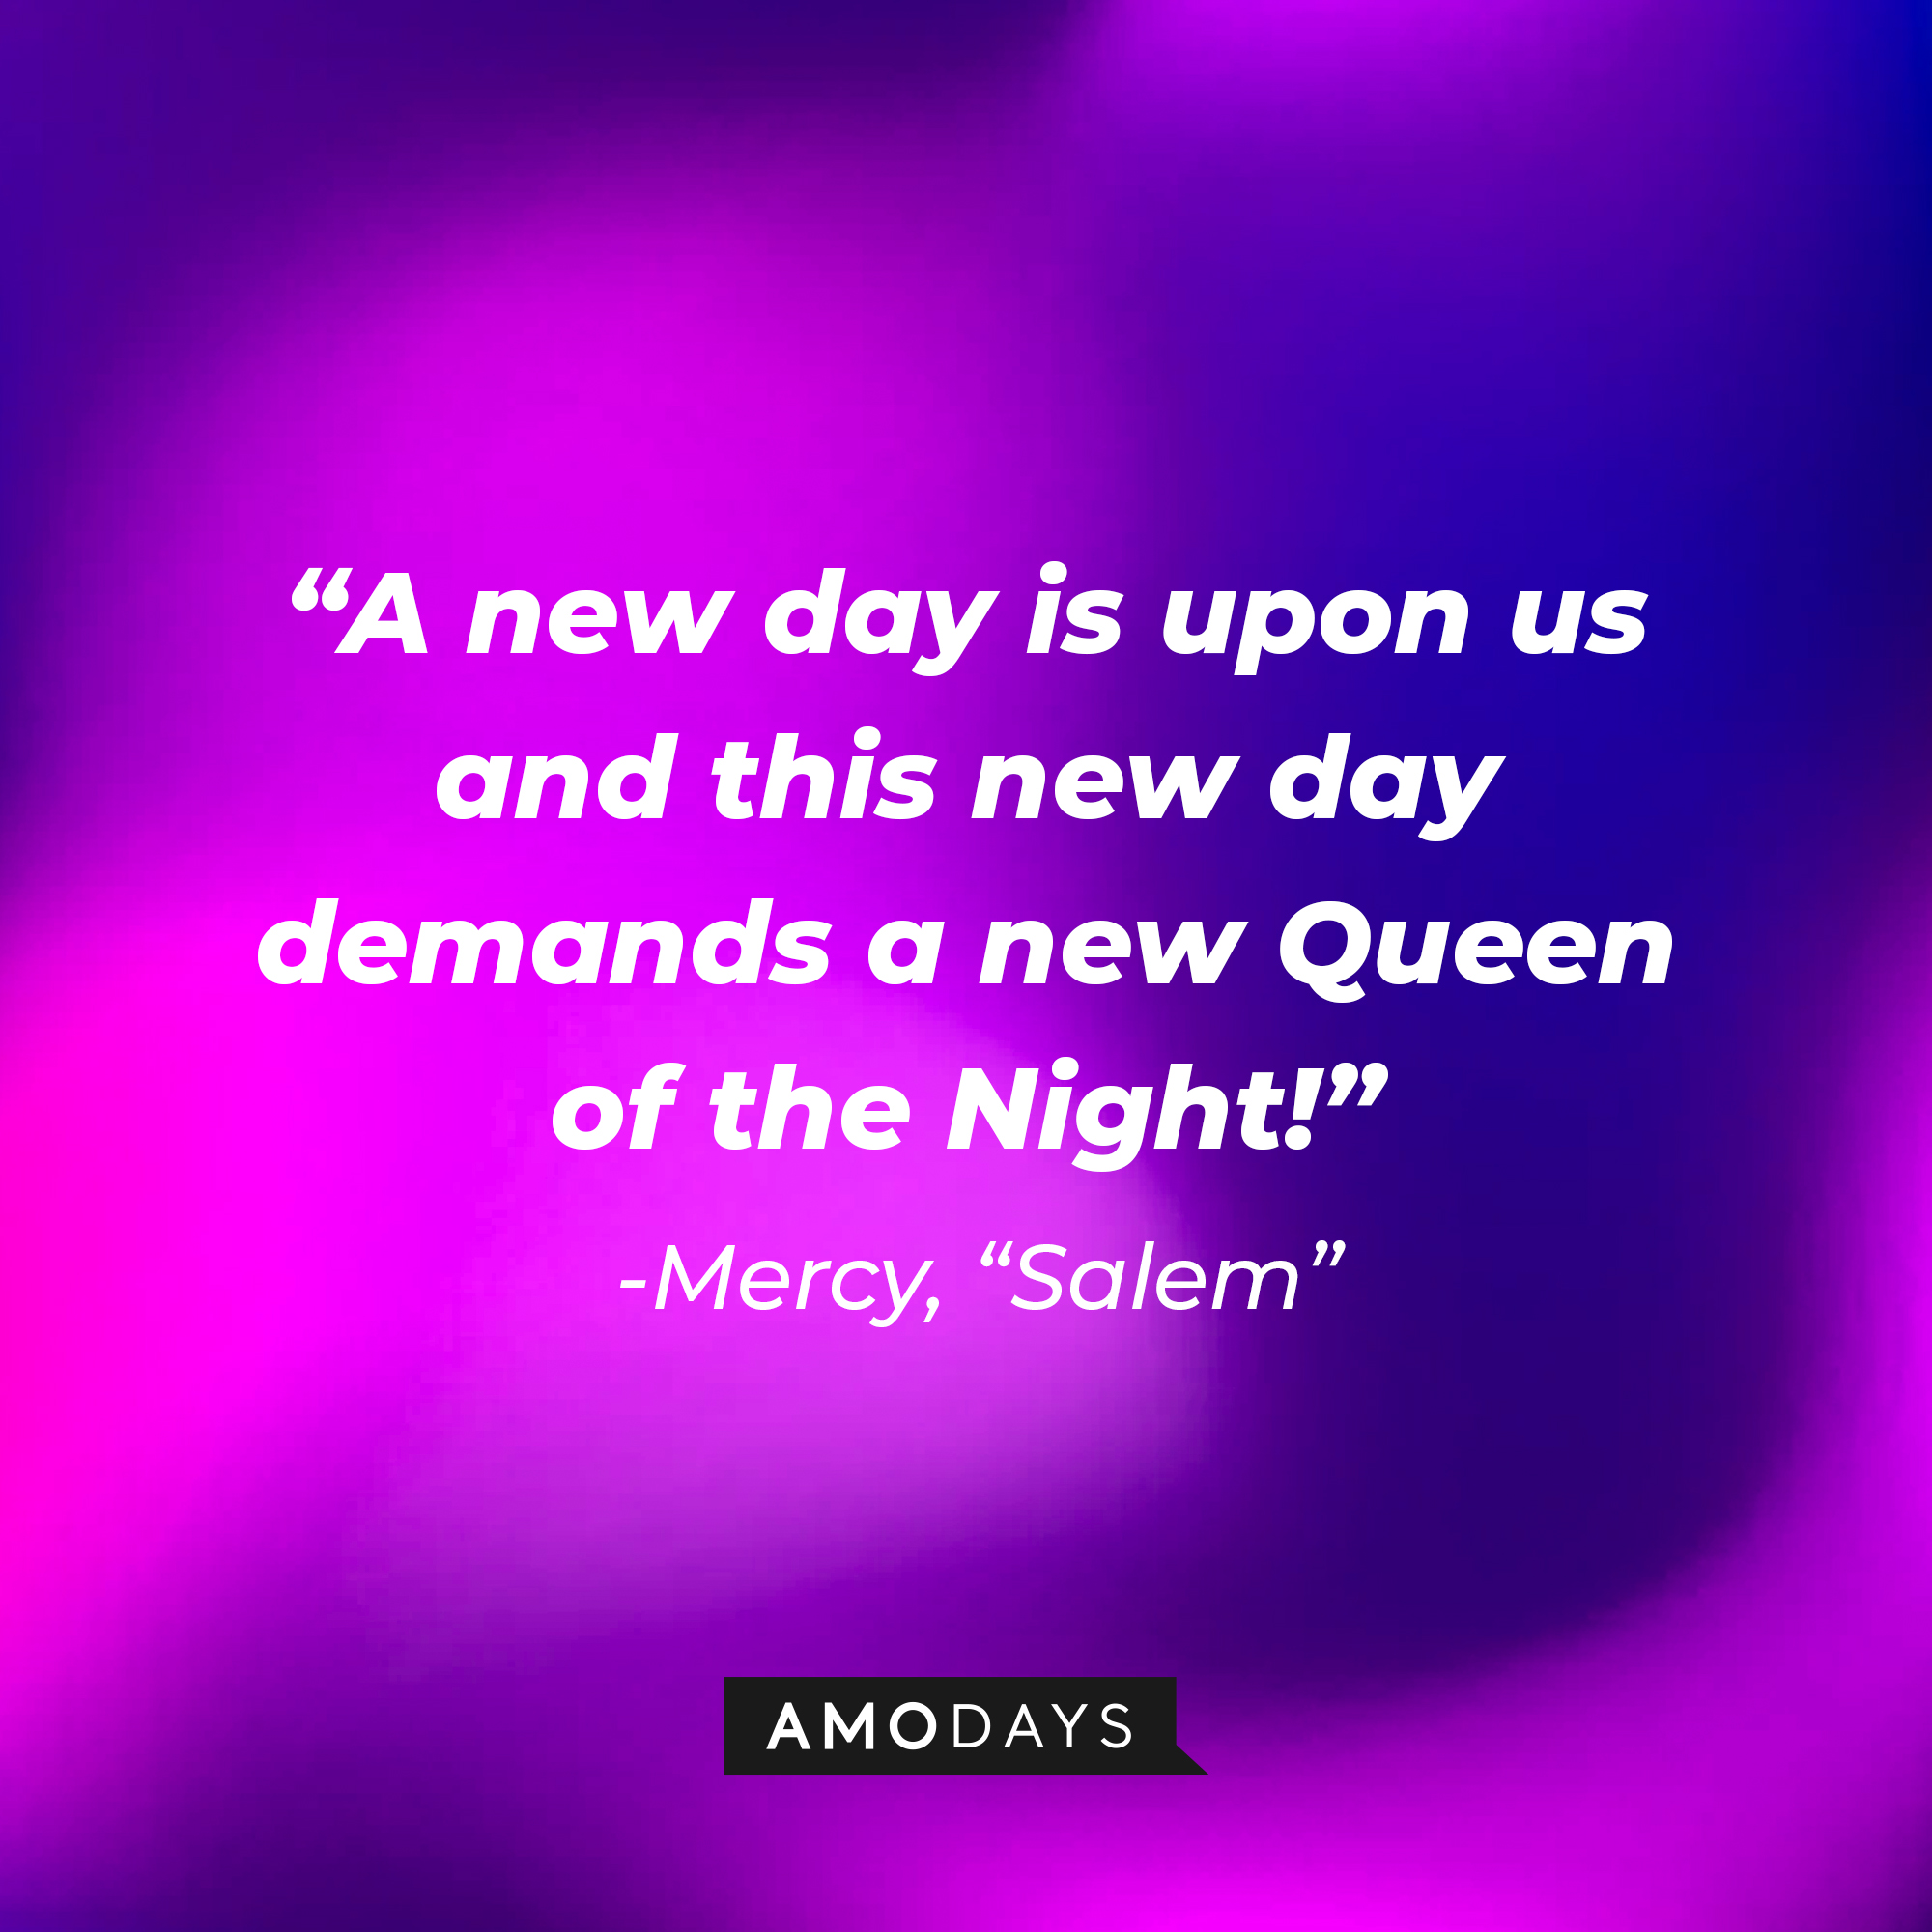 Mercy's quote: "A new day is upon us and this new day demands a new Queen of the Night!" | Source: Amodays